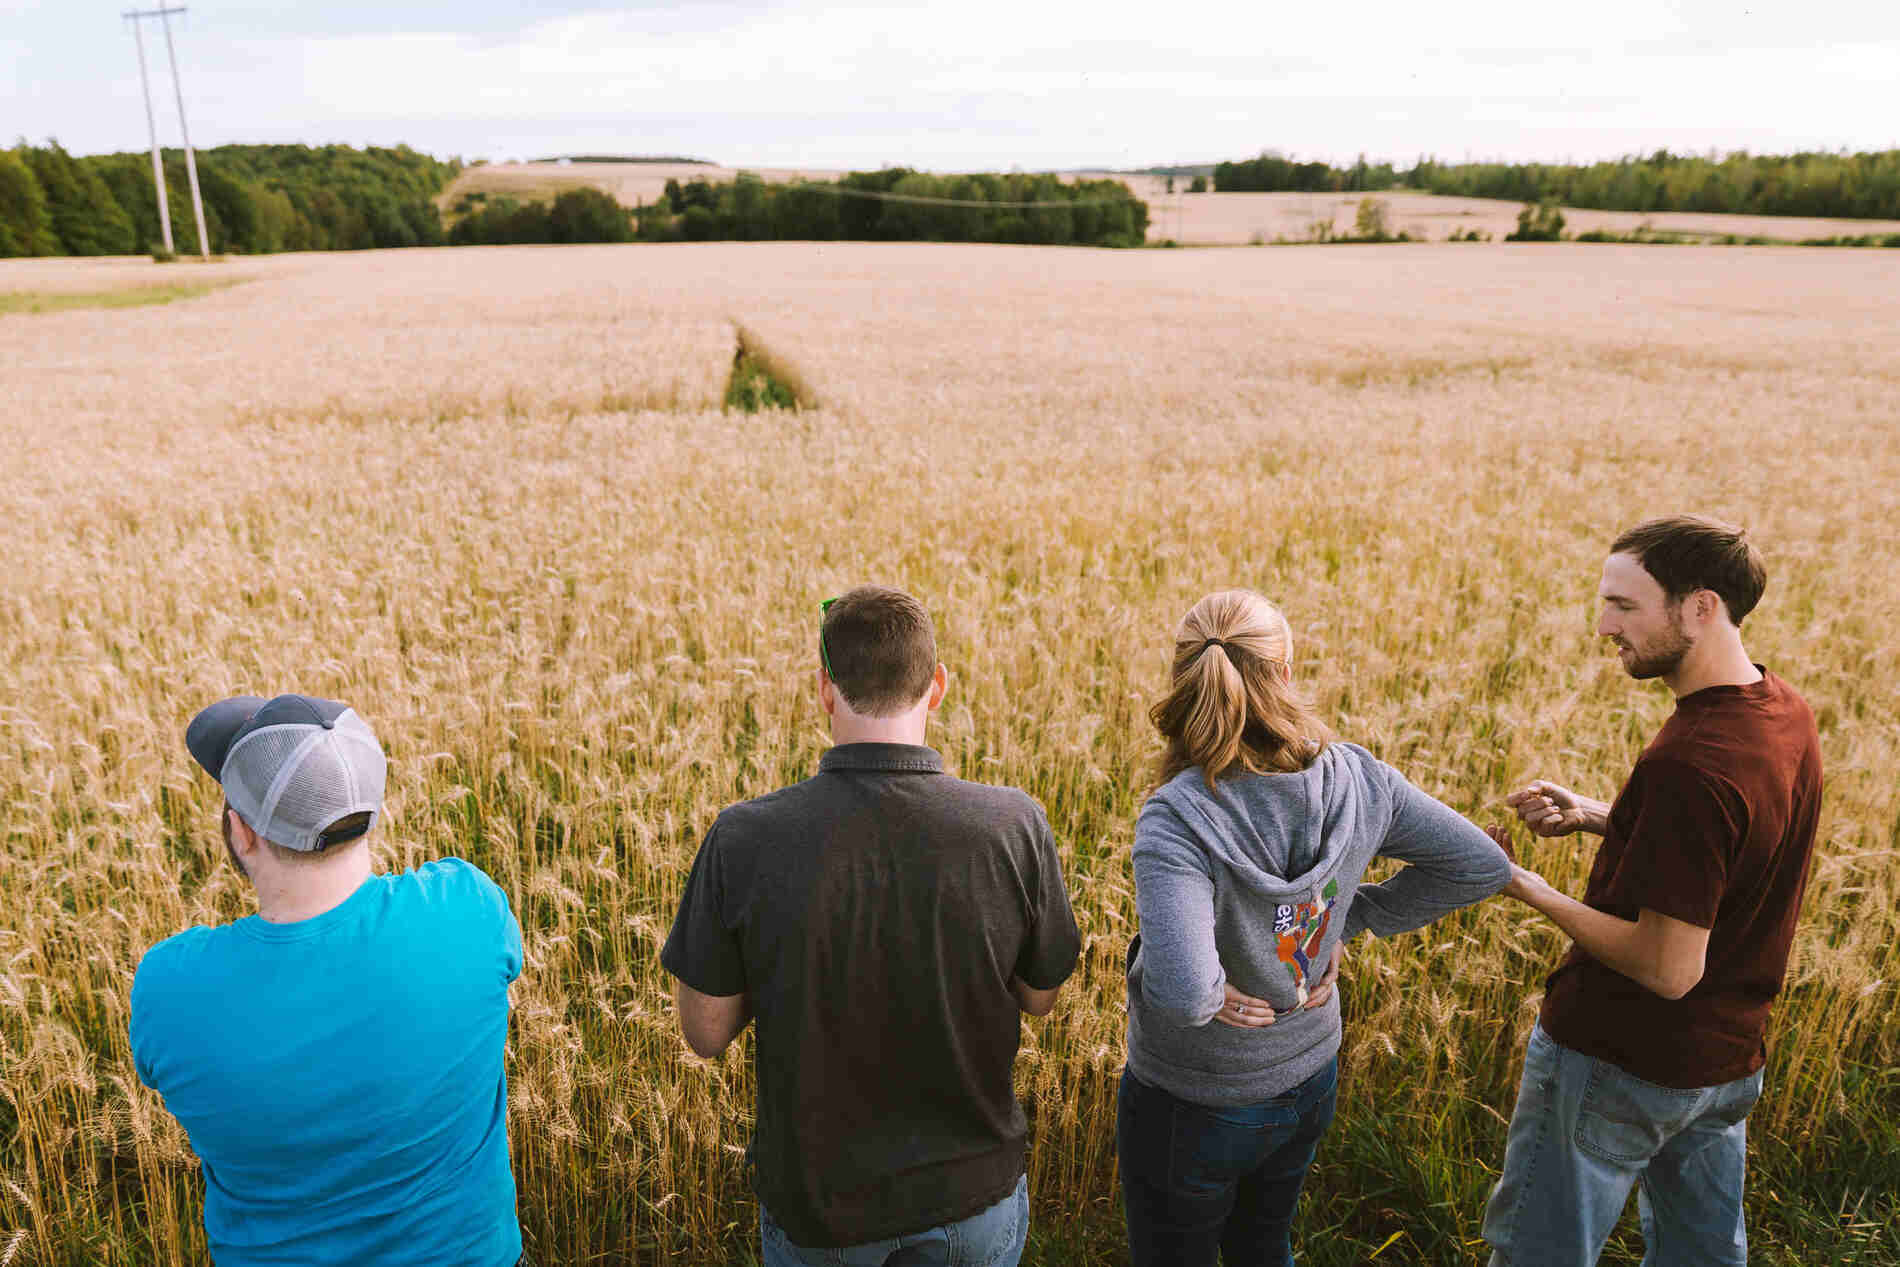 Allagash Brewing Company in wheat and barley fields.